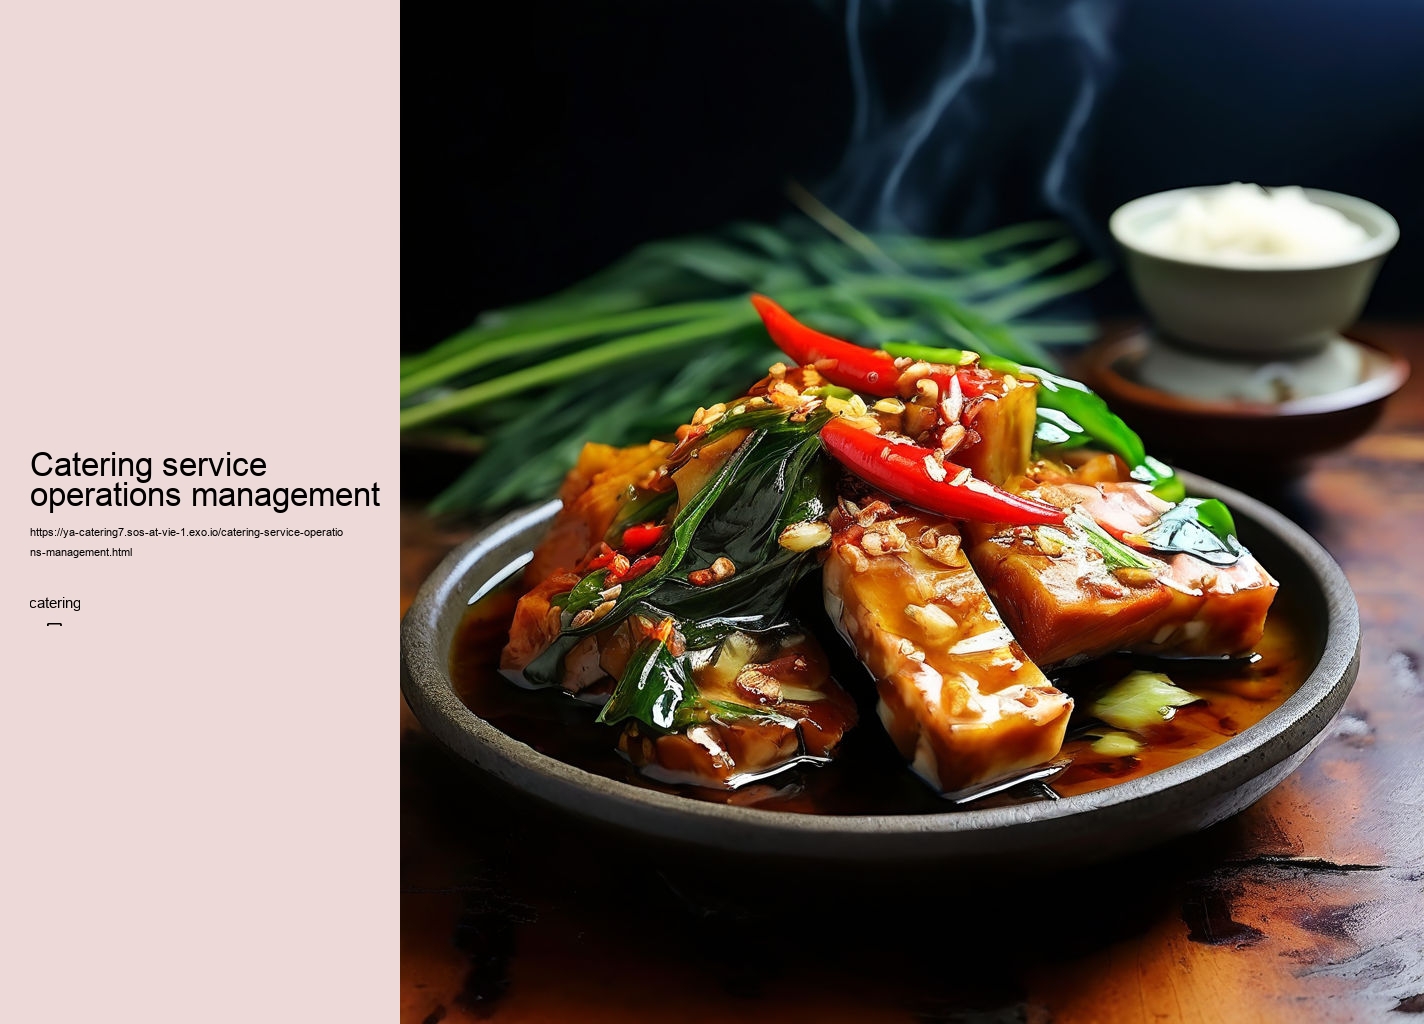 Catering service operations management